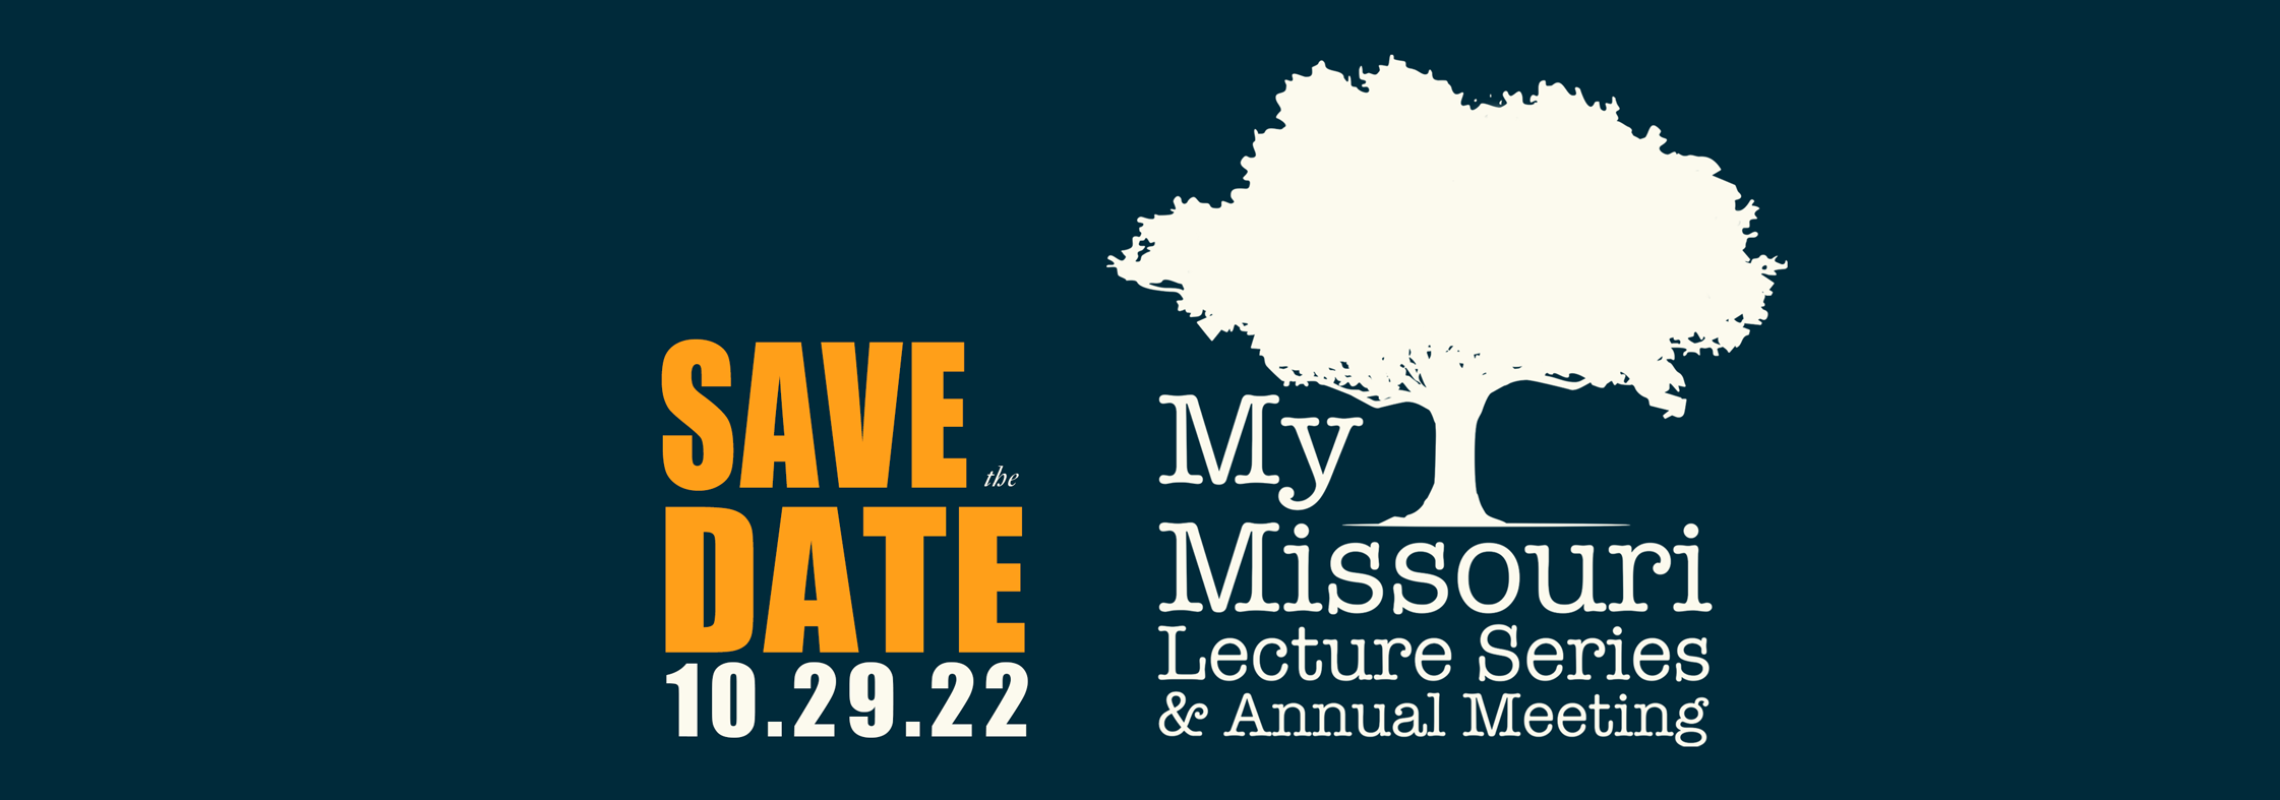 Save the Date Oct. 29, 2022 for the My Missouri Lecture and Annual Meeting